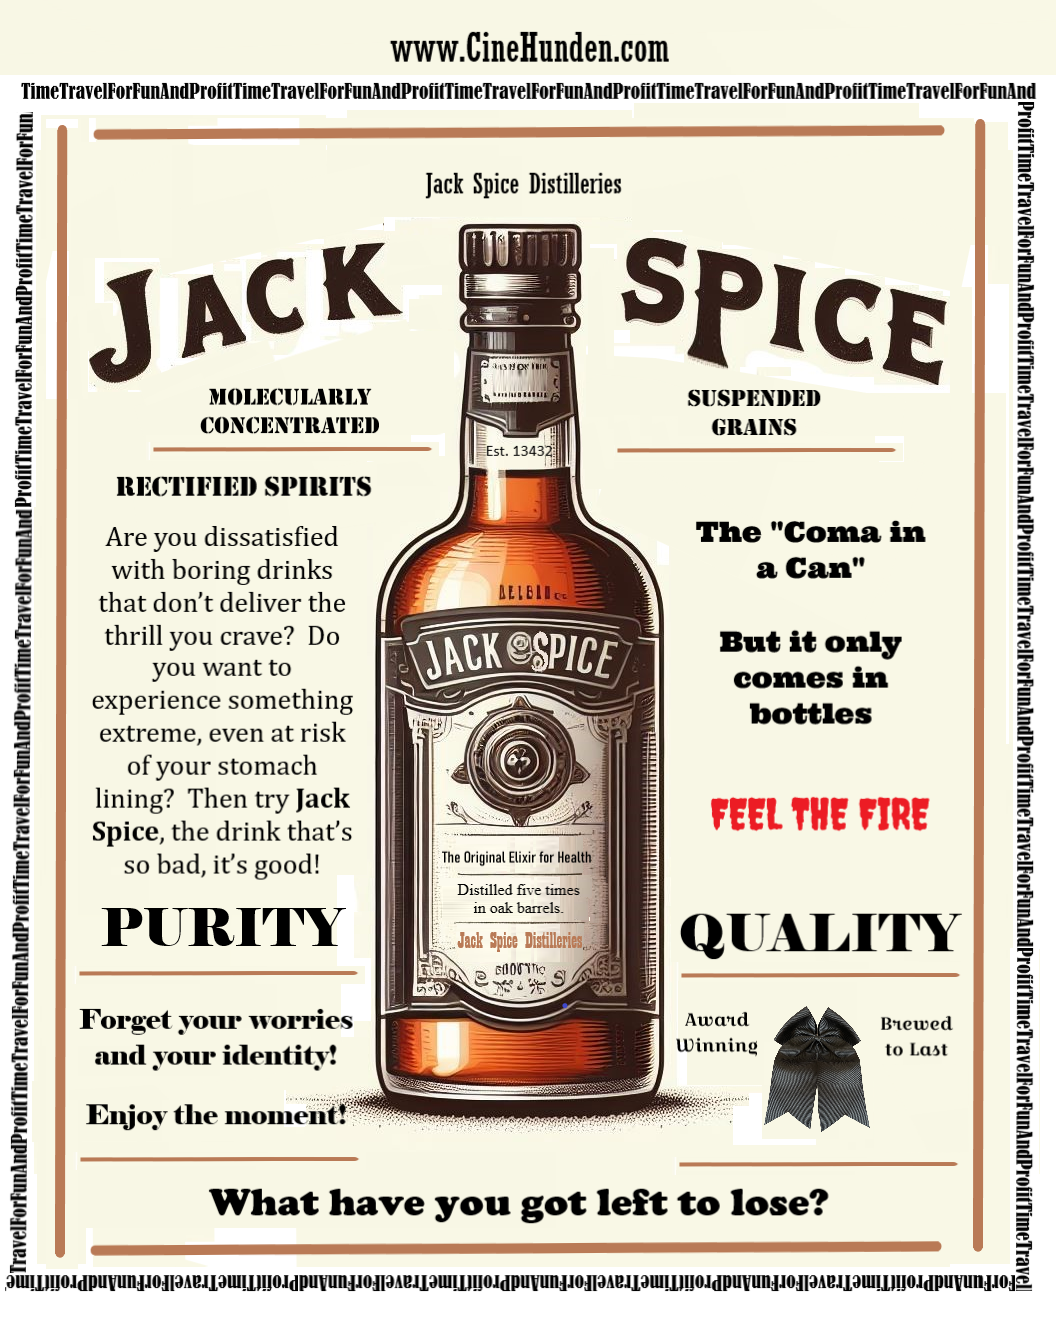 JACK SPICE IS RECTIFIED!